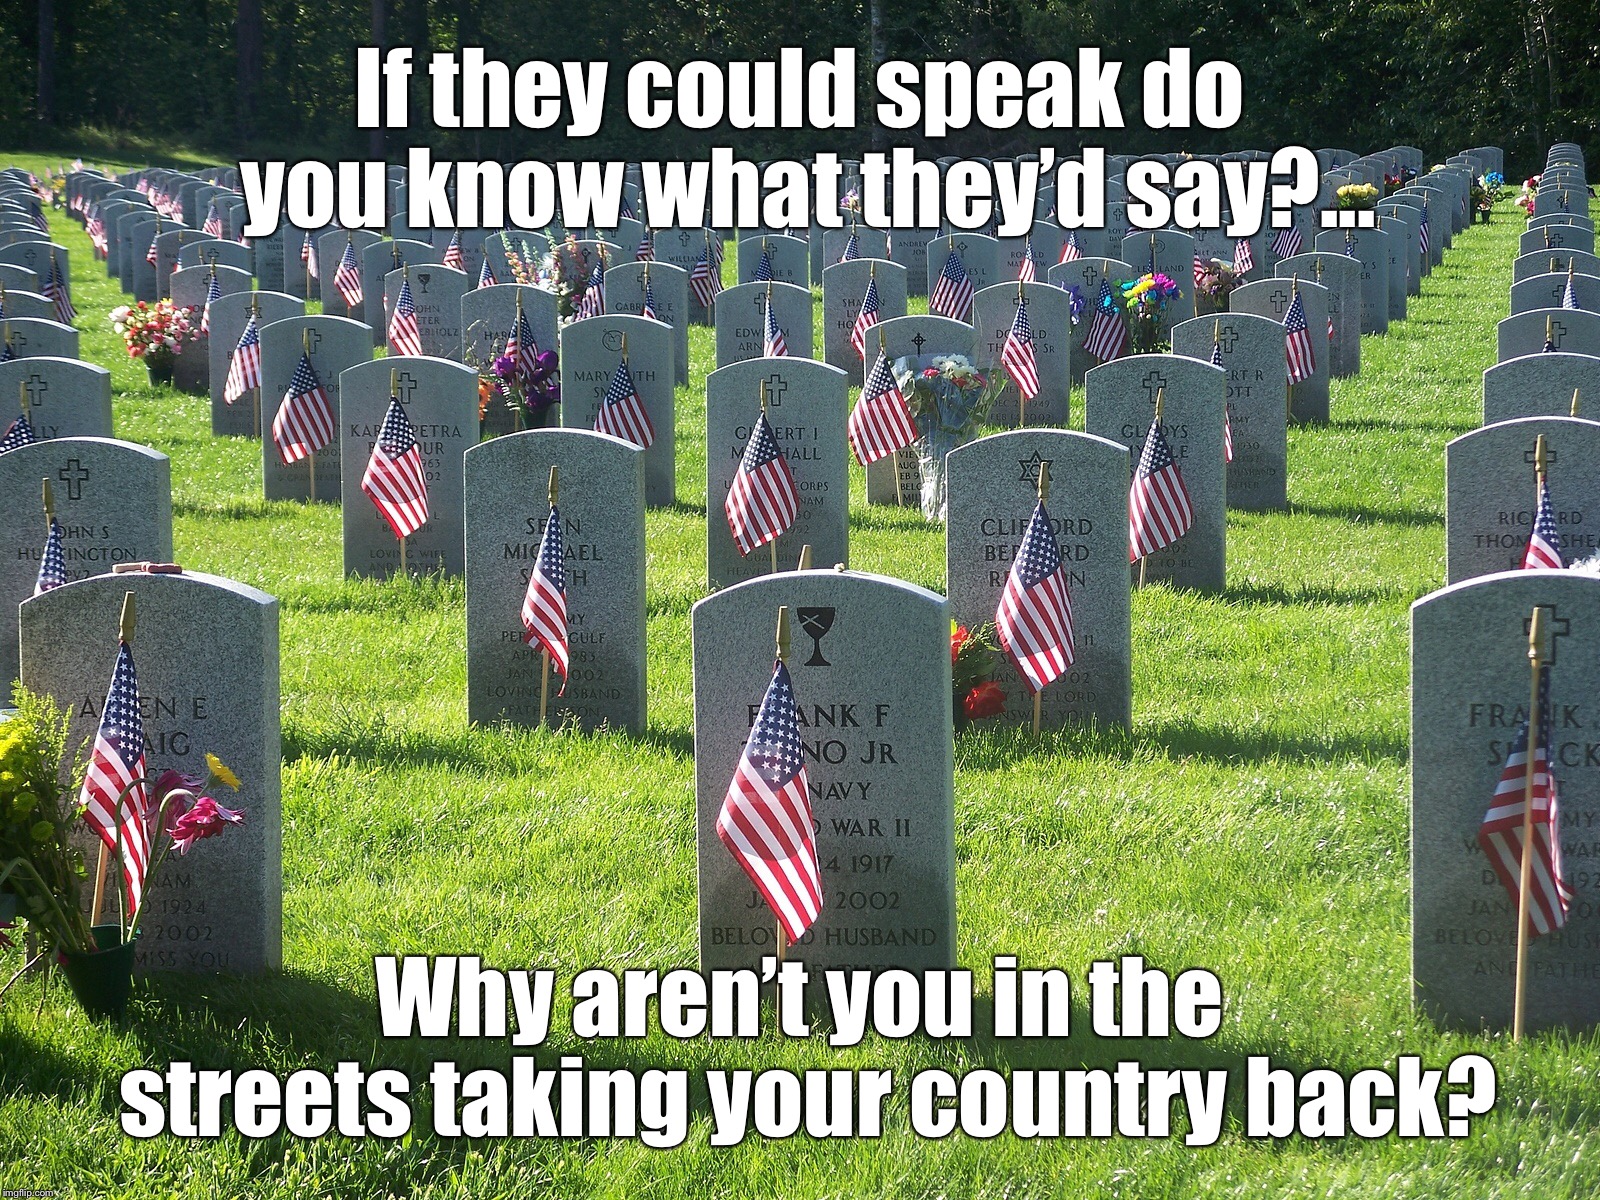 Why aren’t you taking your country back? |  If they could speak do you know what they’d say?... Why aren’t you in the streets taking your country back? | image tagged in memorial day,fascism,protest,revolution | made w/ Imgflip meme maker